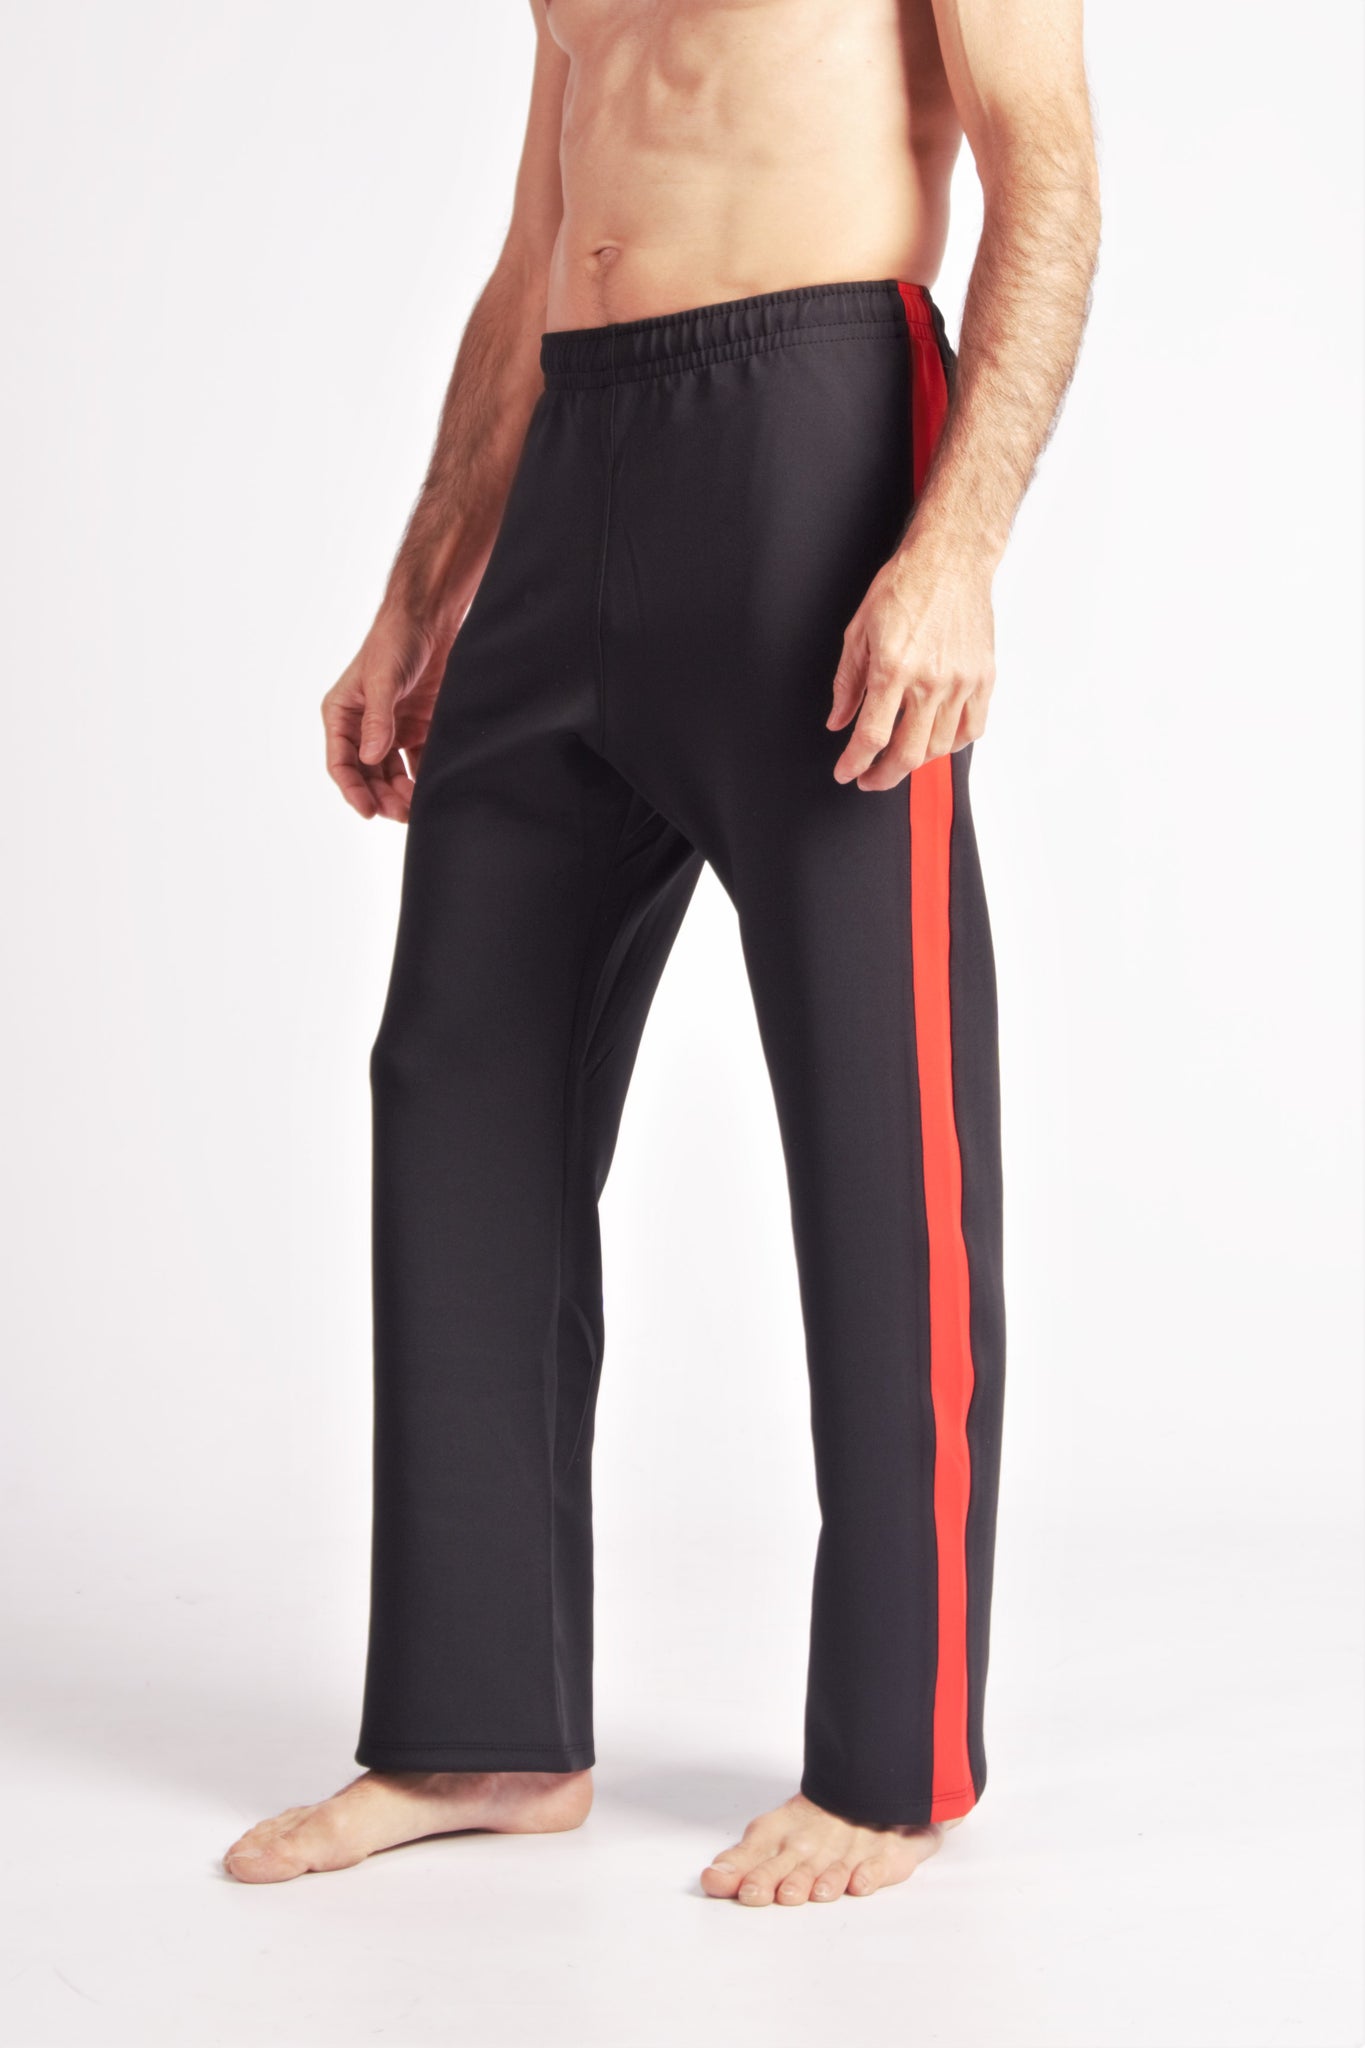 Flying Contemporary Dance Pants - Black & Red / EMotionBodiesBrand – E  Motion Bodies Brand